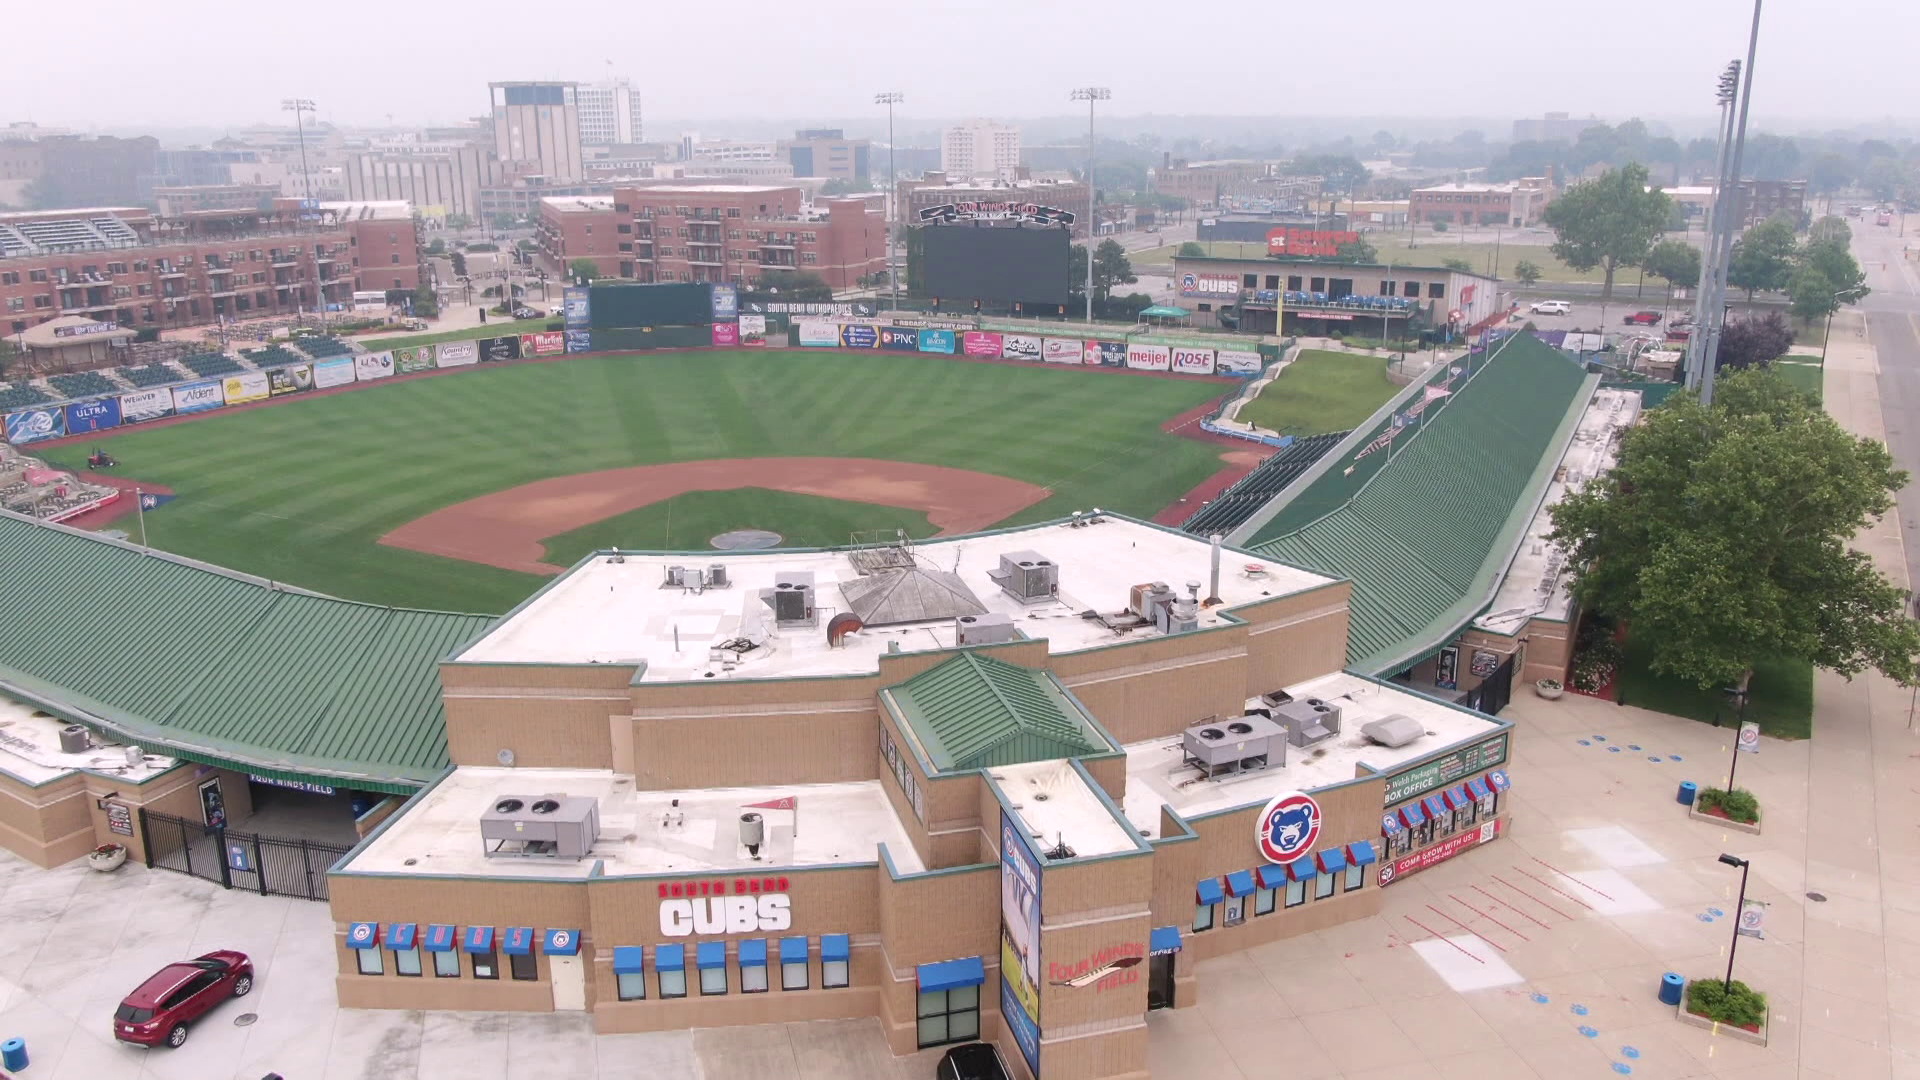 South Bend Cubs in High A minor league baseball at Four Winds Field